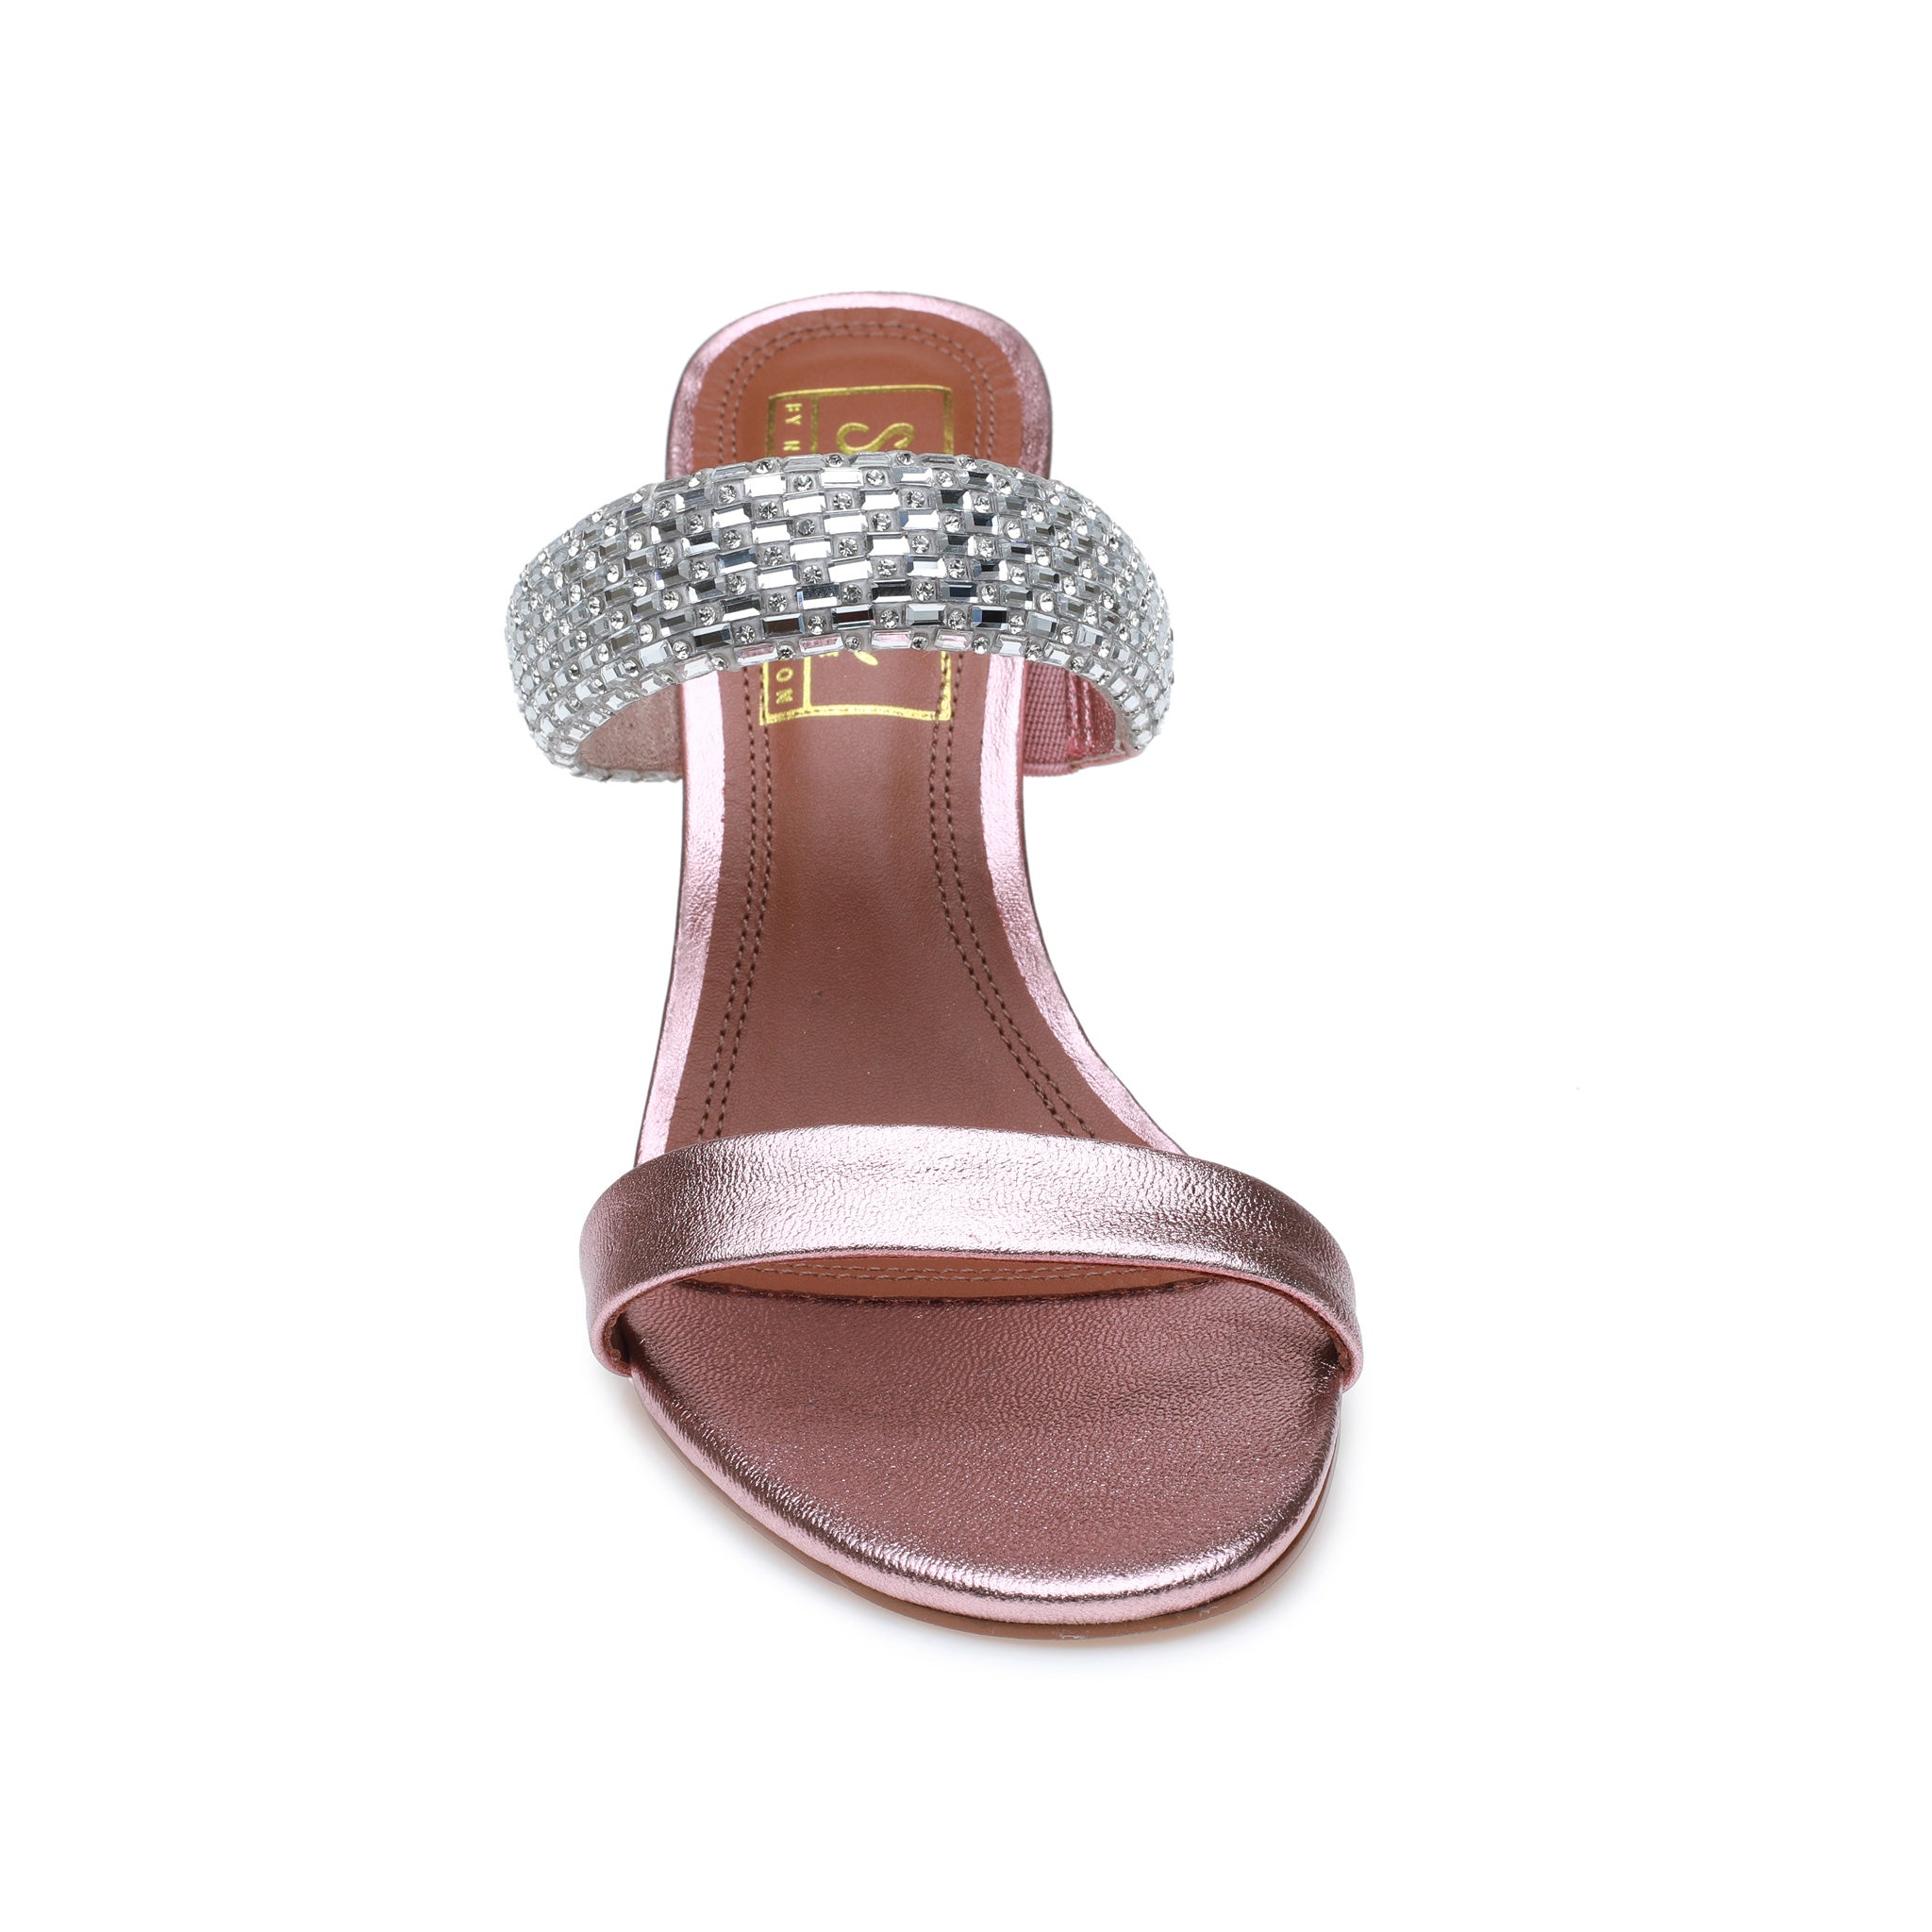 Metallic Rose Gold Mule with Jewels